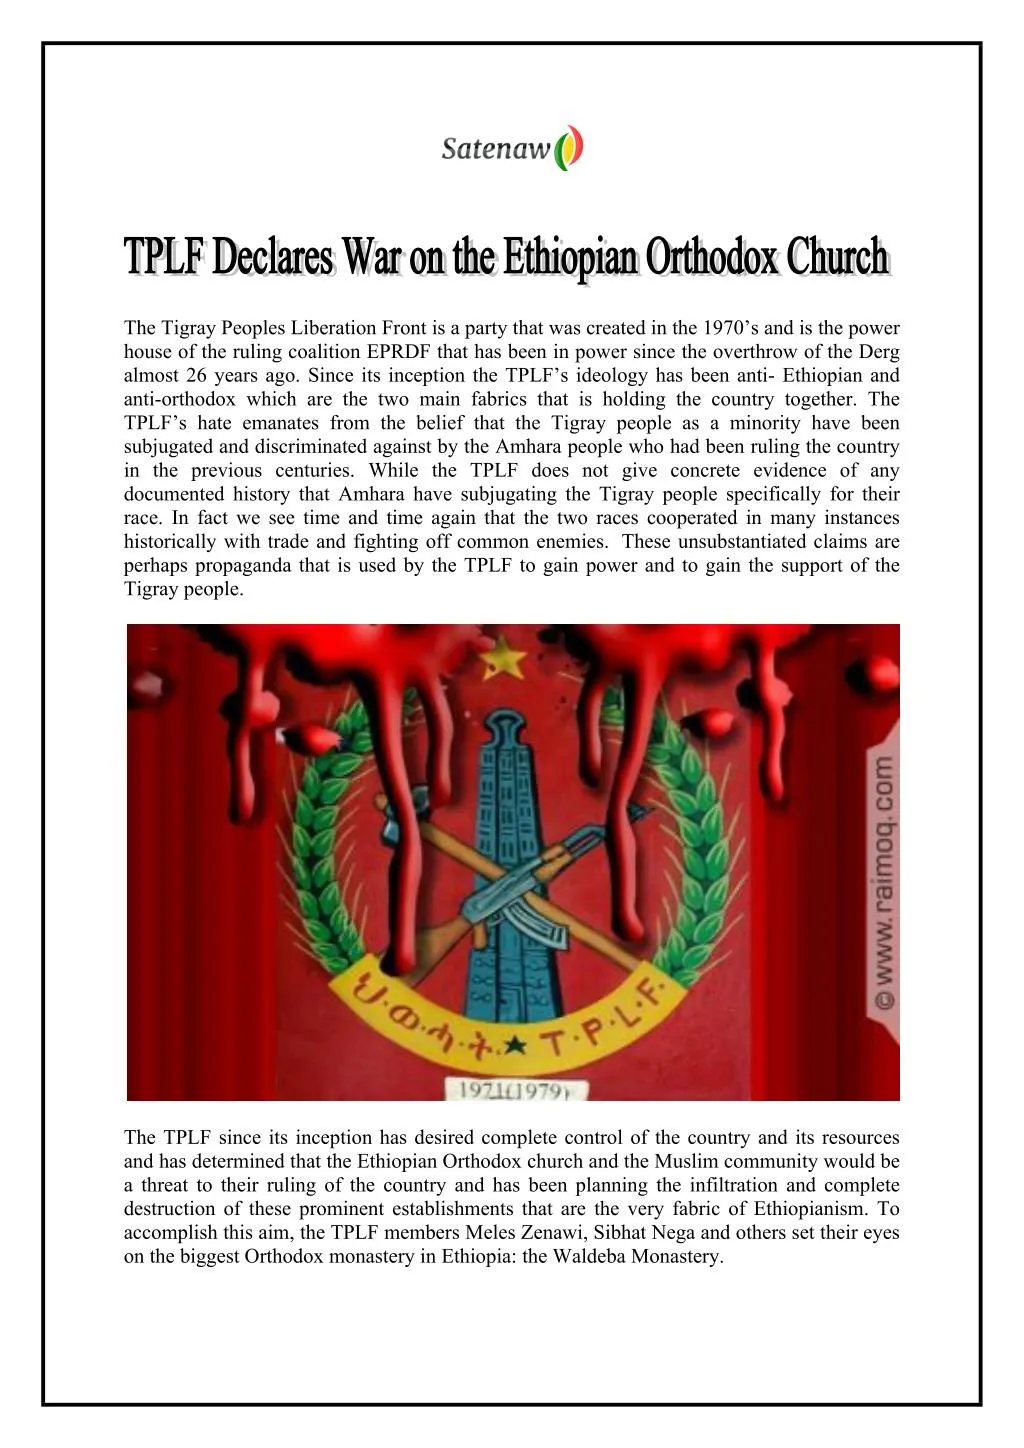 the tigray peoples liberation front is a party